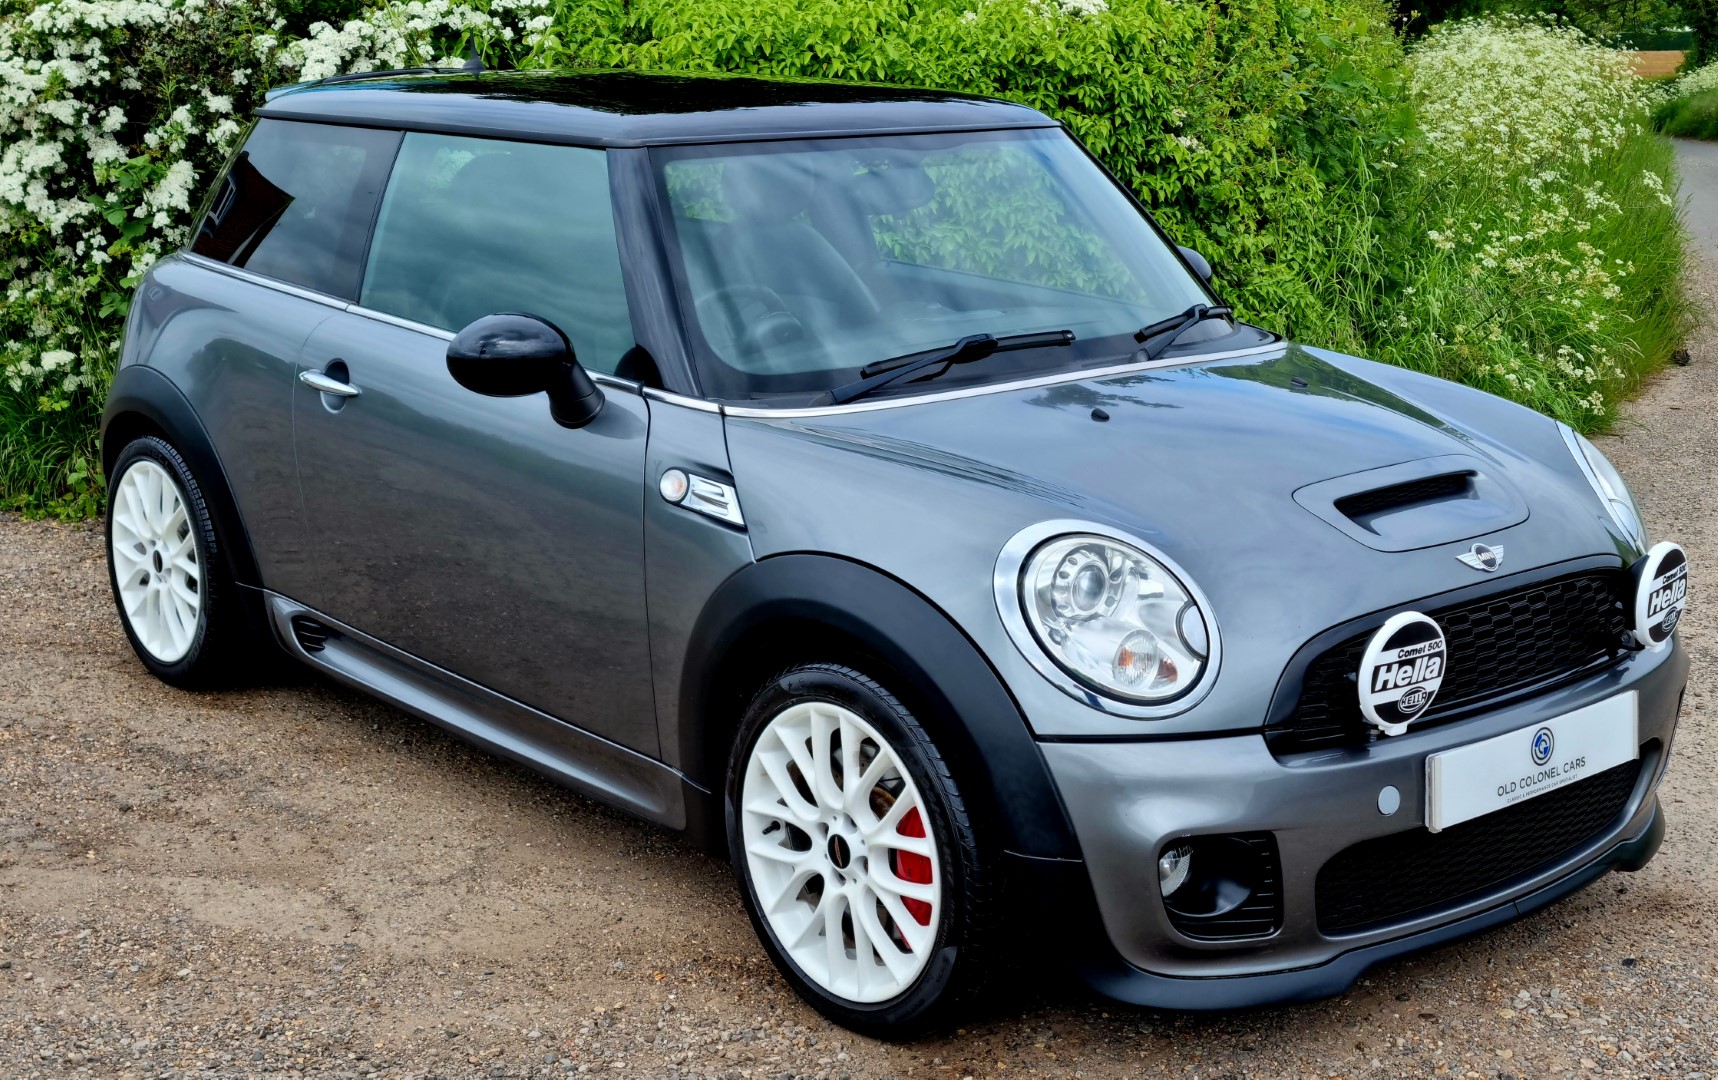 MINI R56 JOHN COOPER WORKS - Old Colonel Cars - Old Colonel Cars